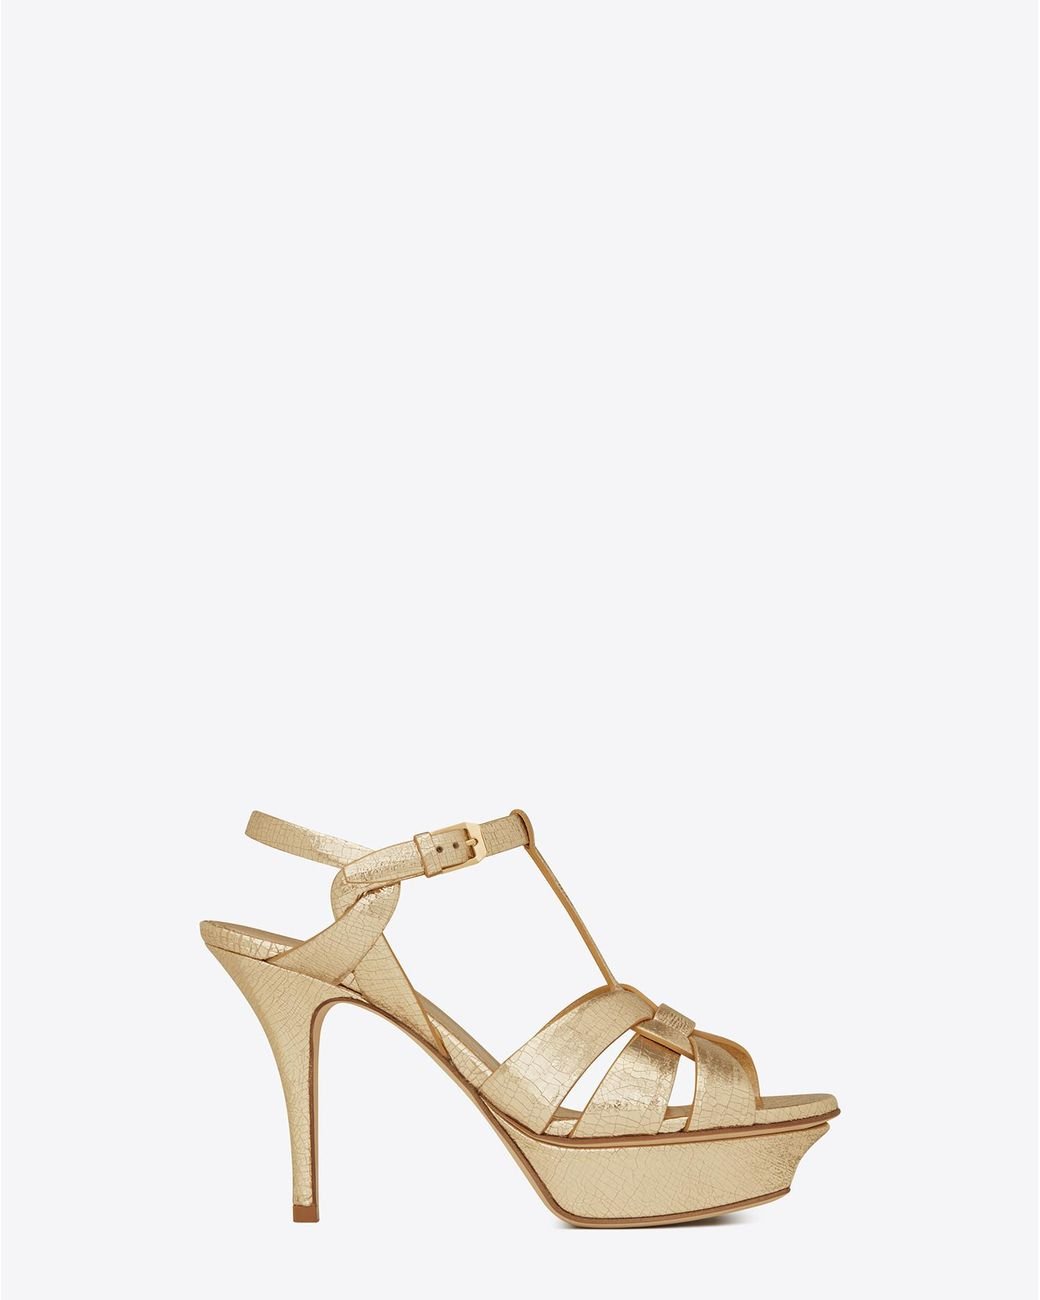 Saint Laurent Tribute 75 Sandal In Pale Gold Cracked Metallic Leather | Lyst